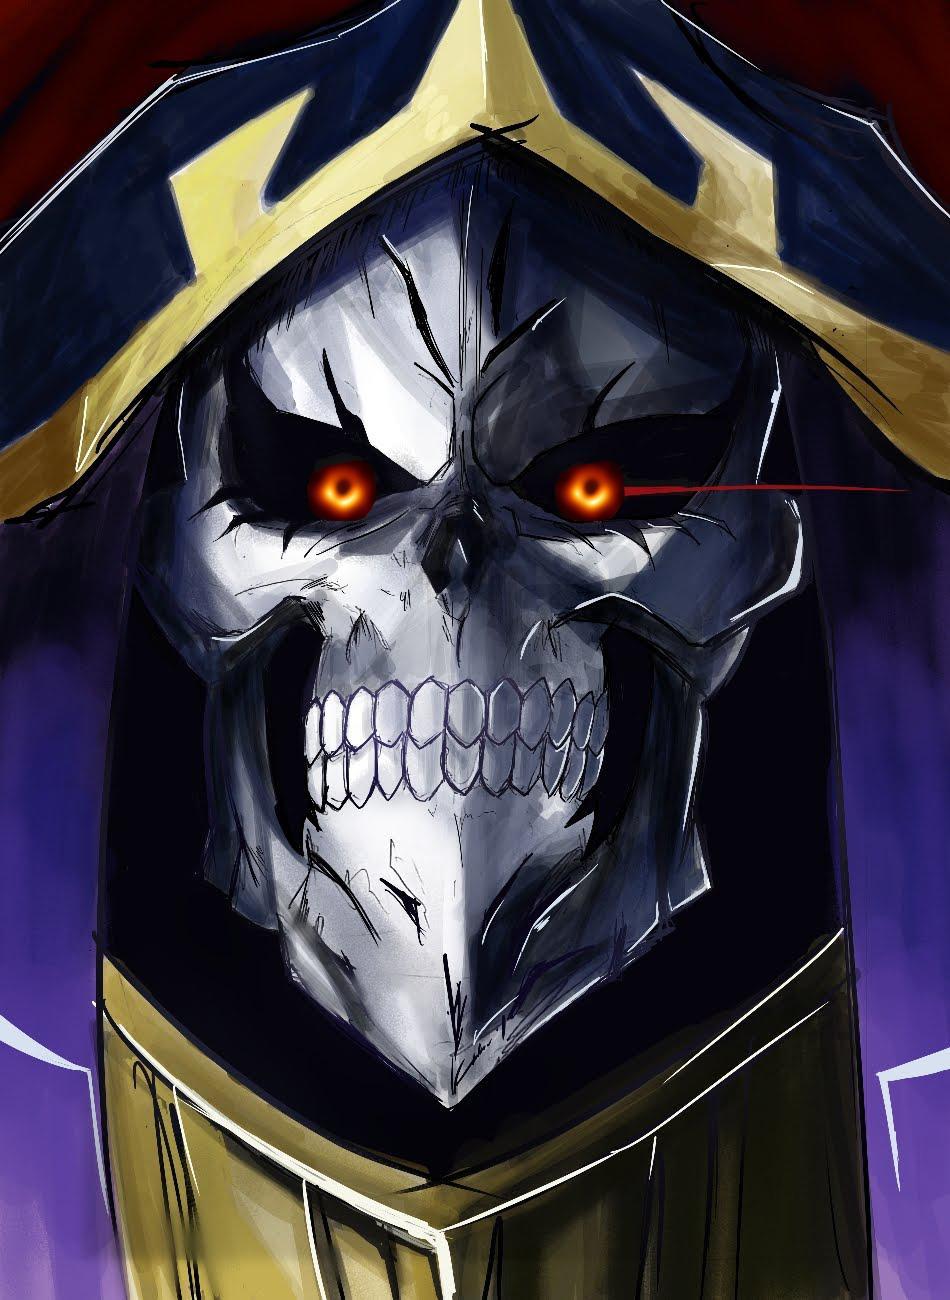 Ainz Ooal Gown (Overlord) vs Anos Voldigoad (Misfit of Demon Academy). chas...